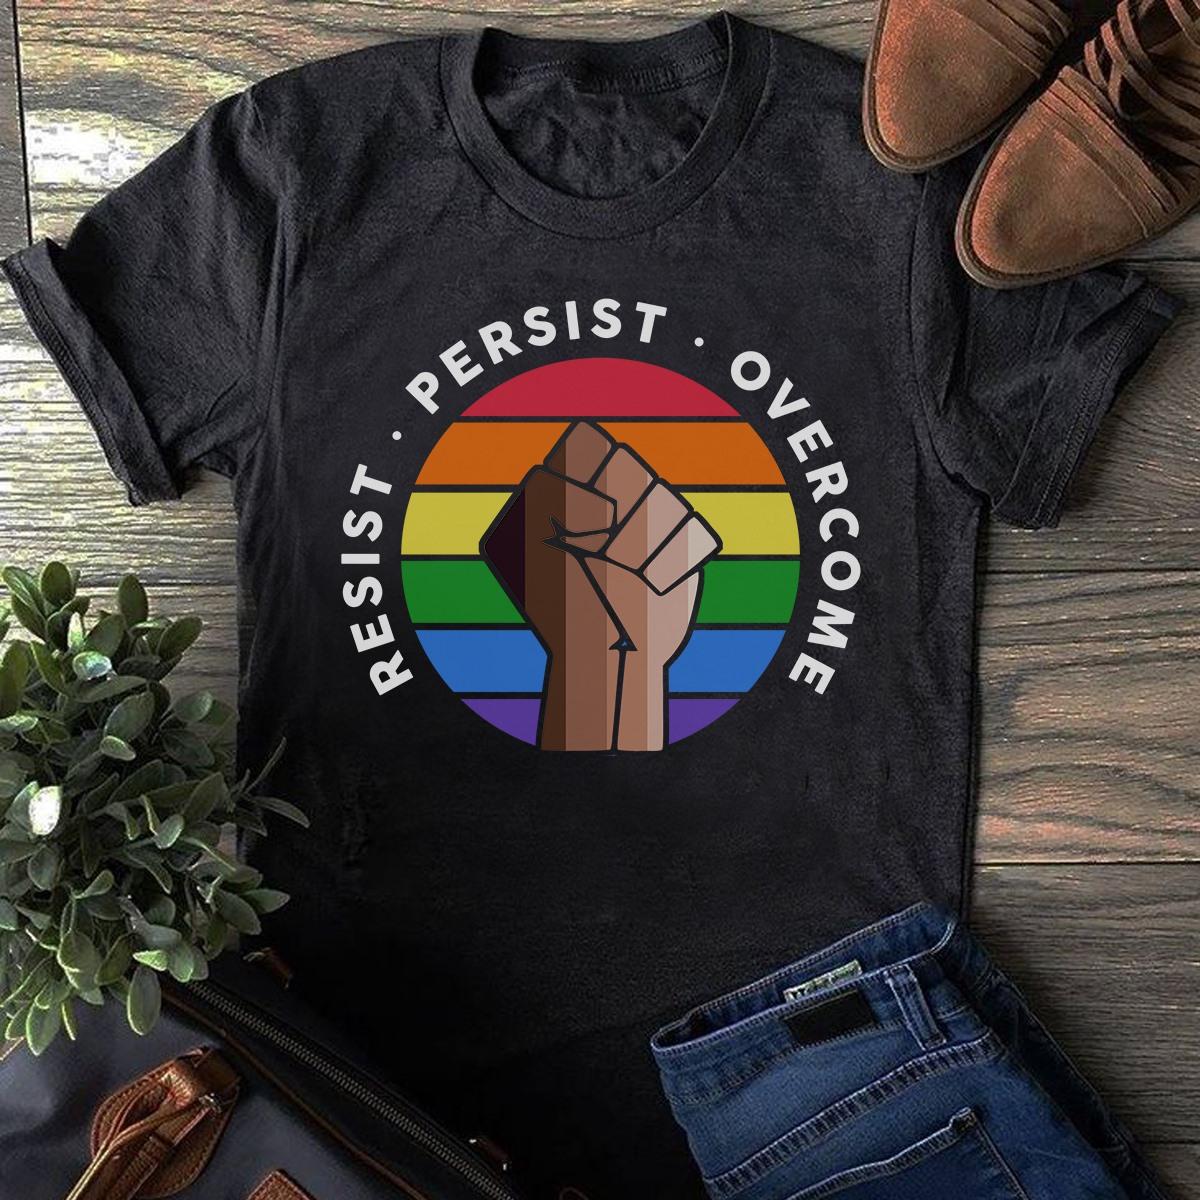 Resist persist overcome - Black community, lgbt community, equal right for everyone